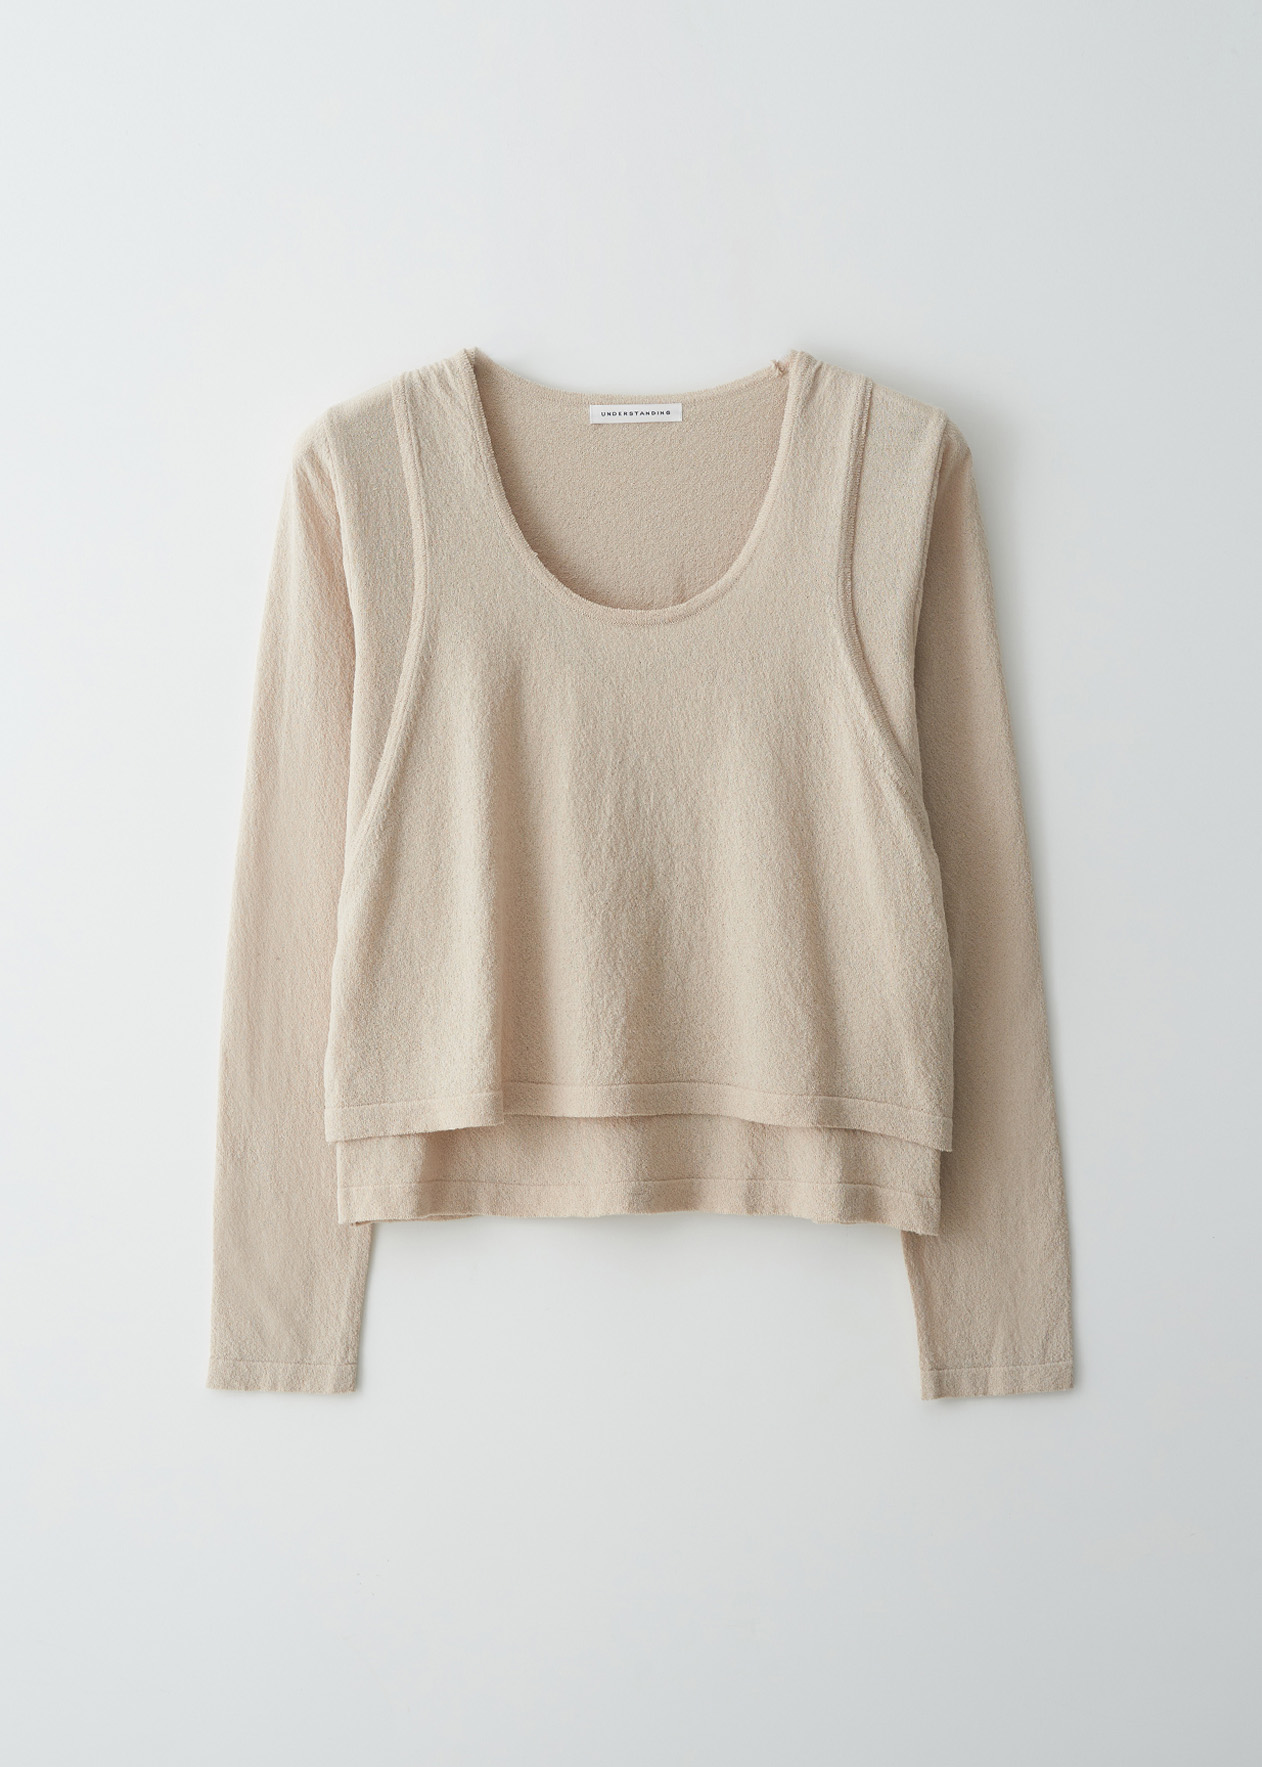 Double-layered knit